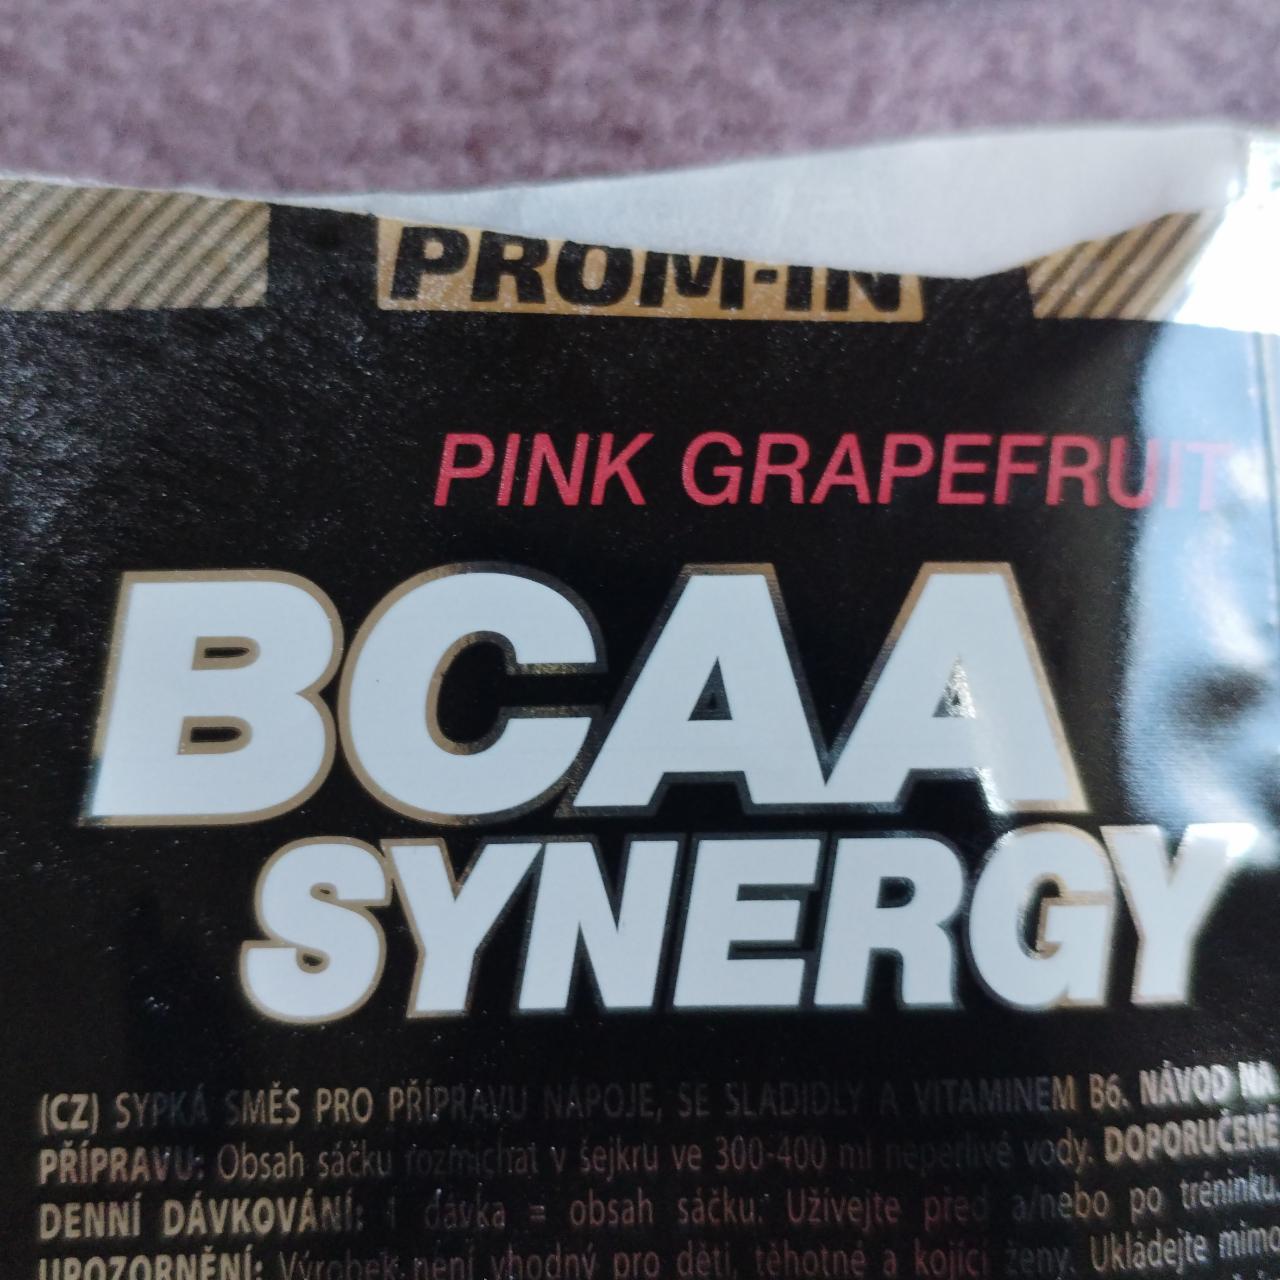 Fotografie - BCAA Synergy Pink Grapefruit Prom-in